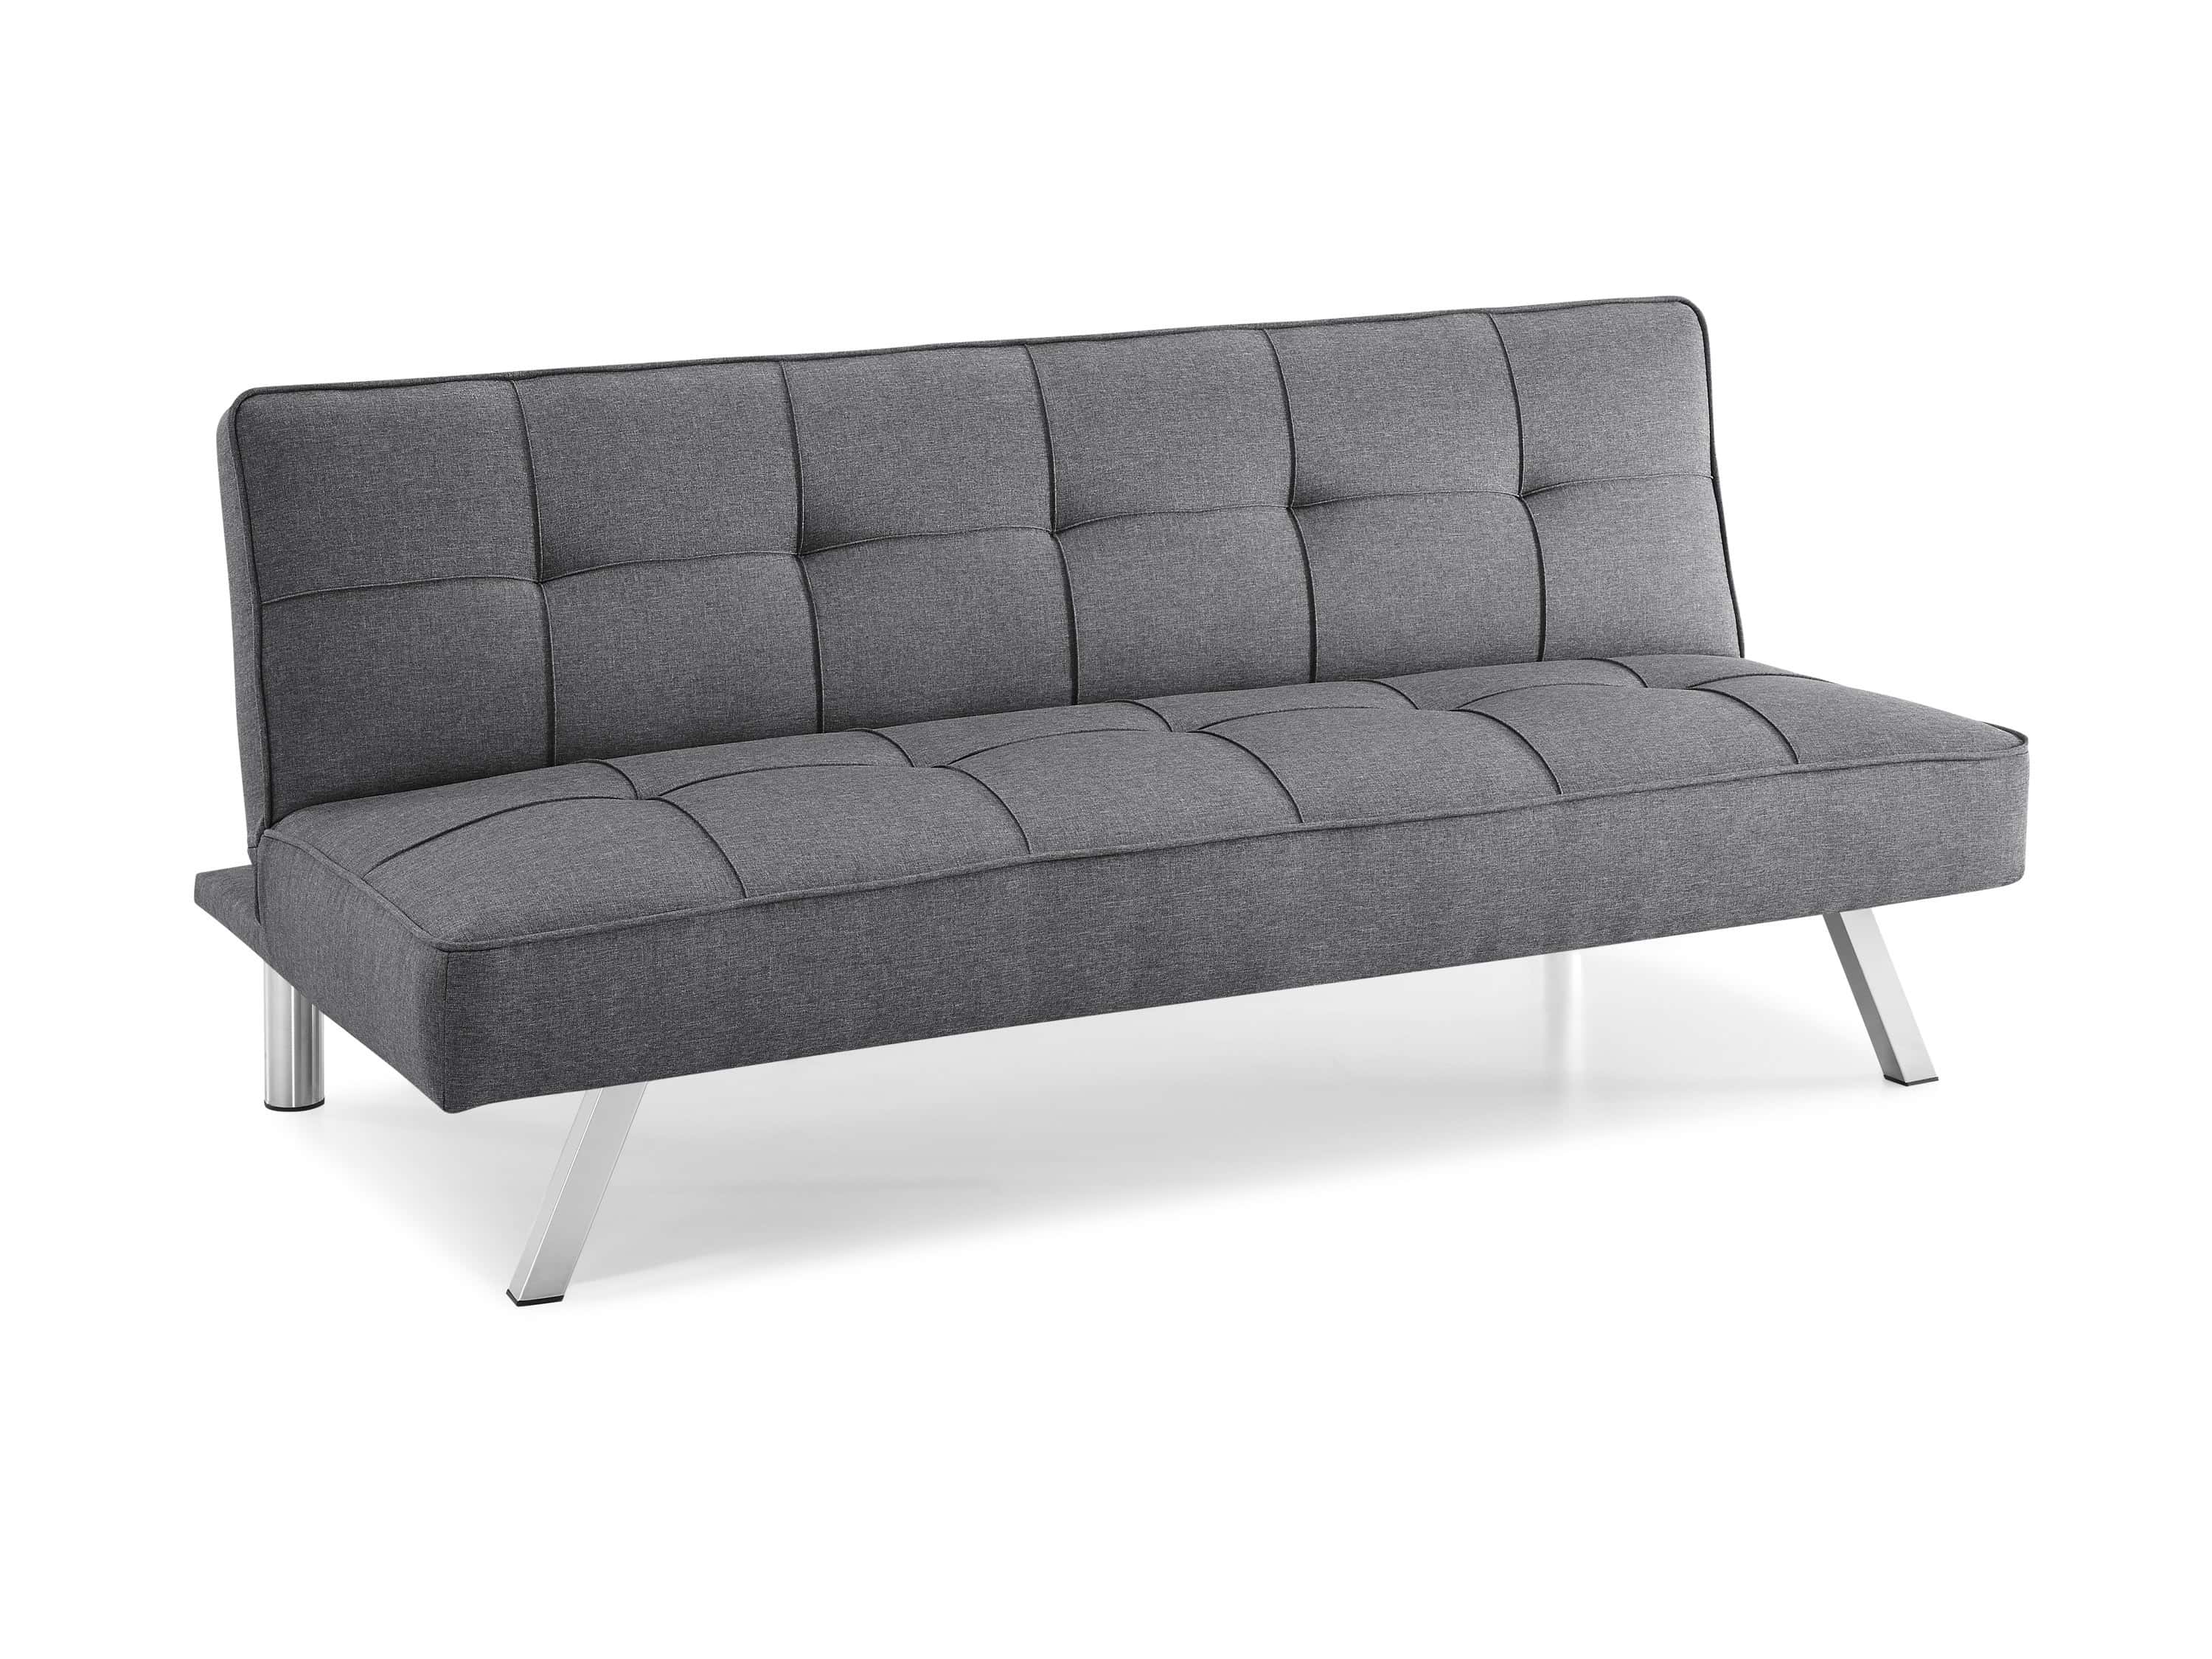 Serta® Corey Light Gray Sofa Bed by Lifestyle Solutions